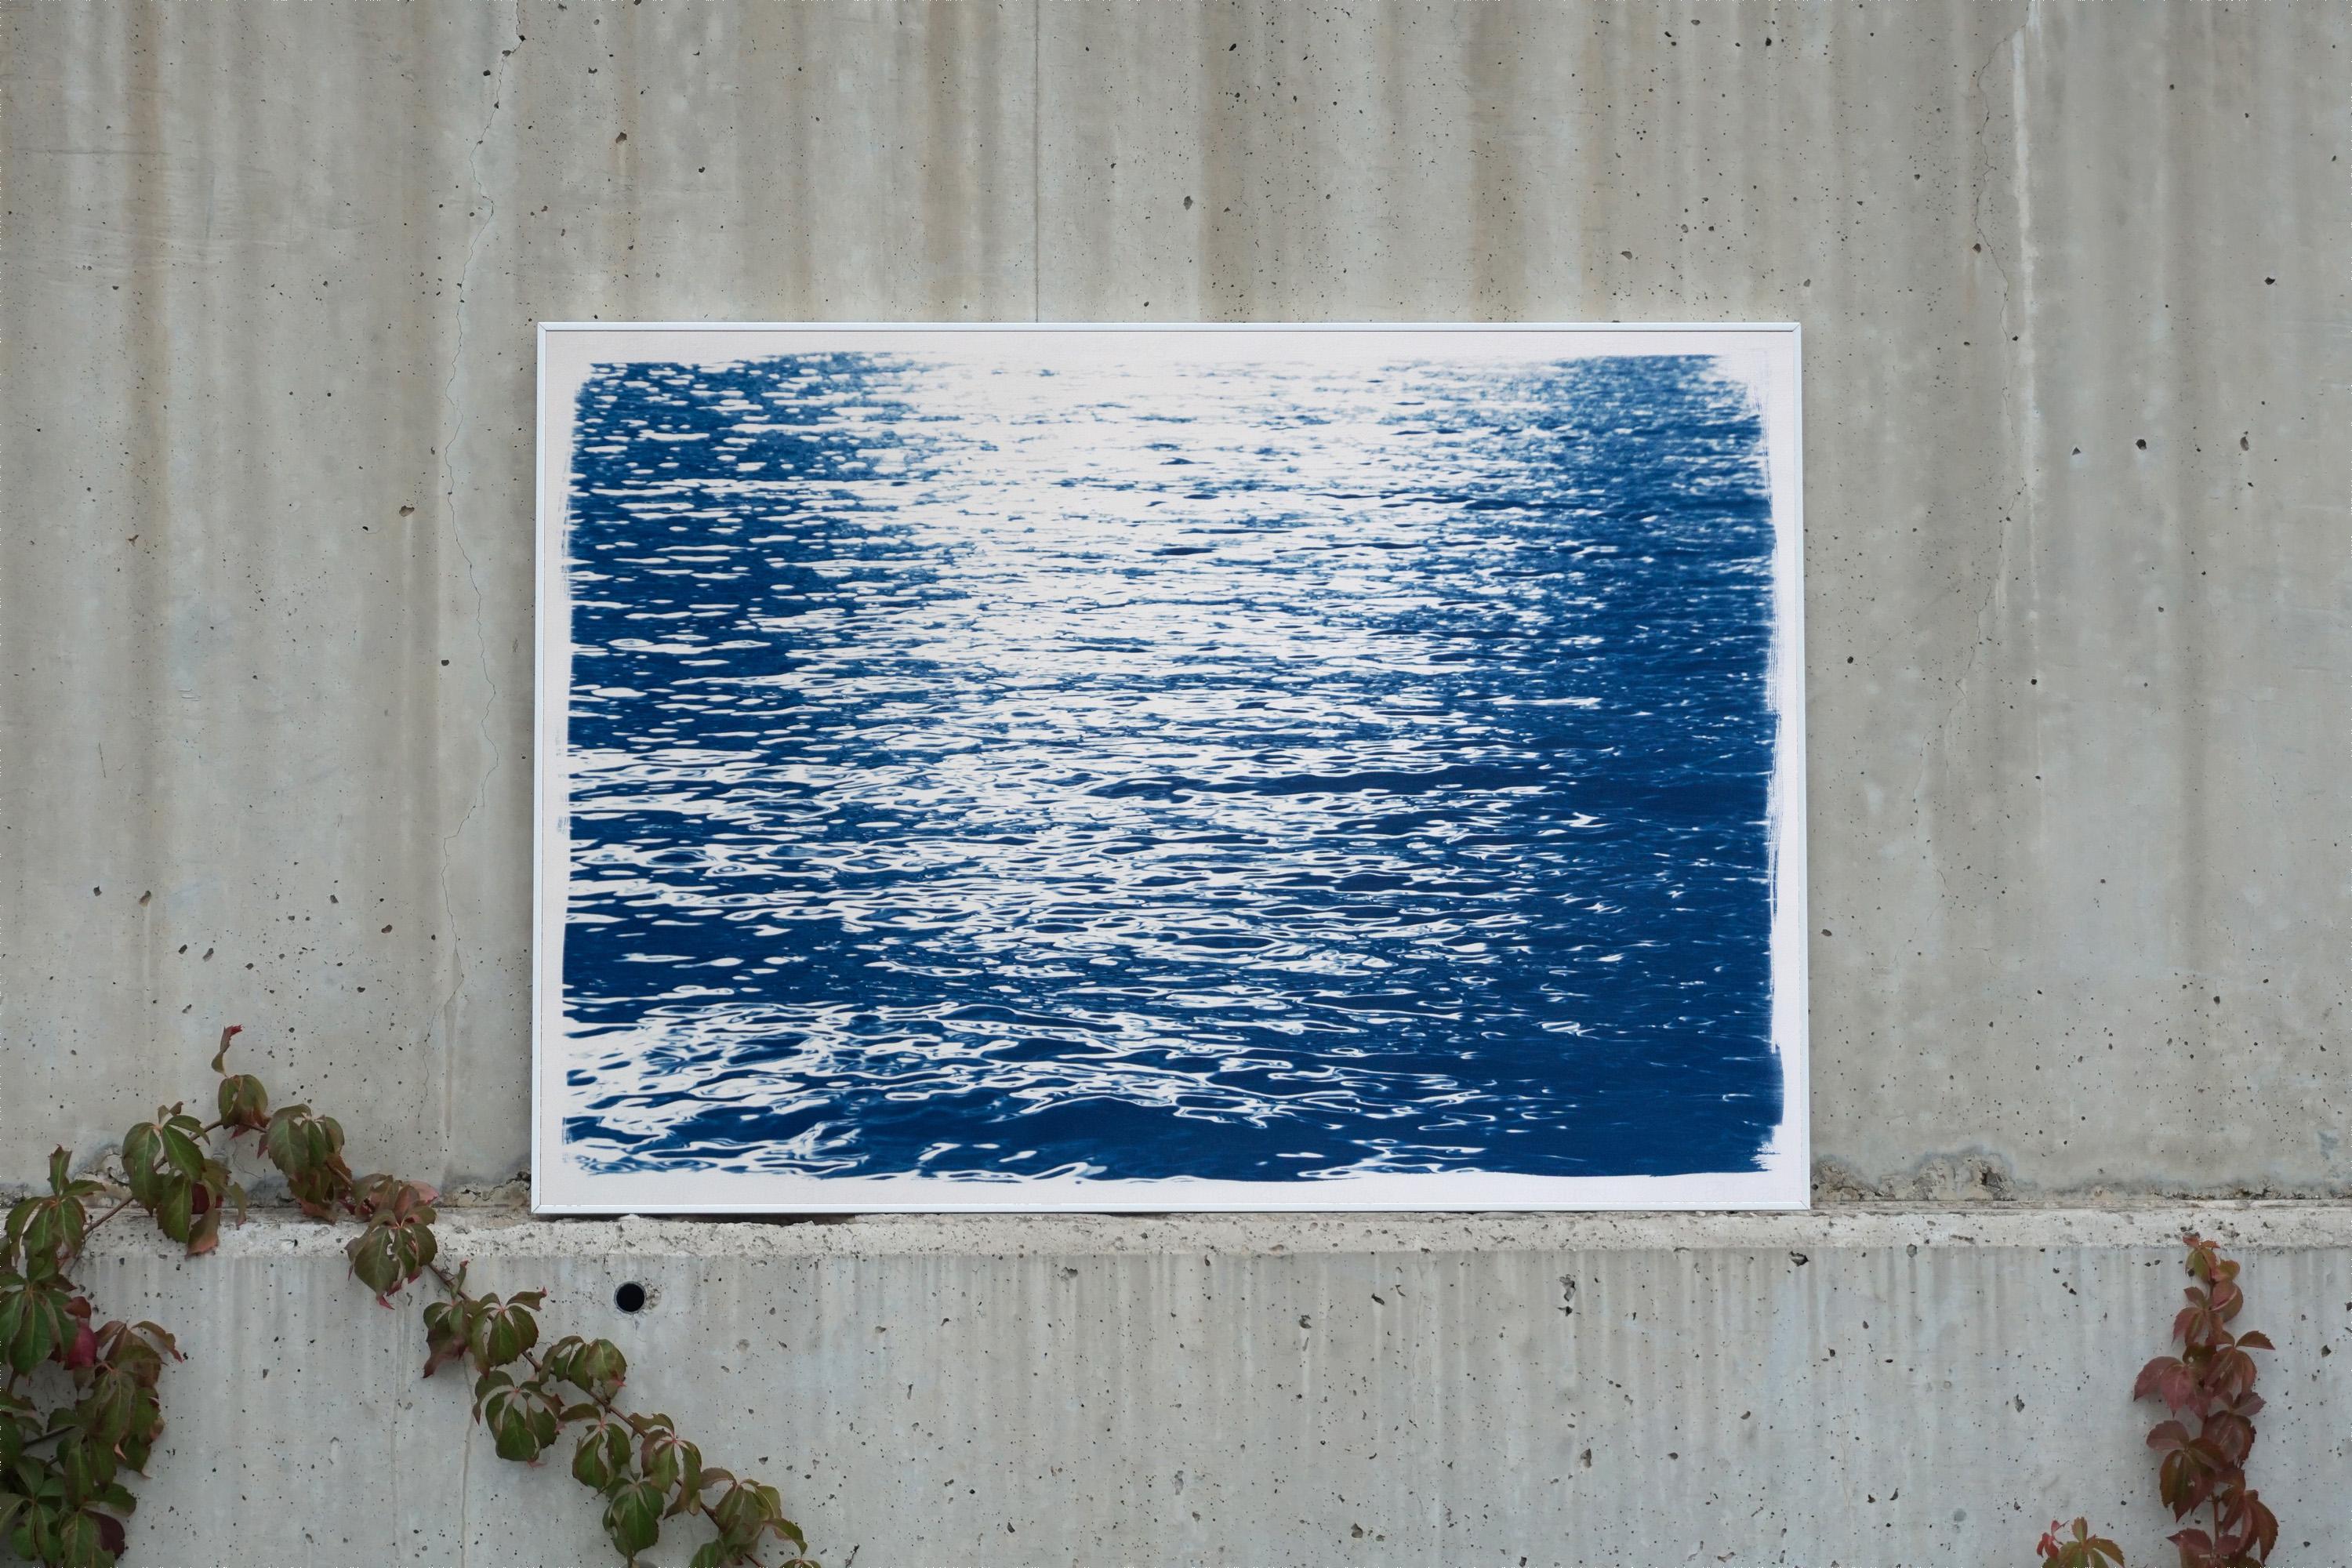 Blue Abstract Ripples Under Moonlight, Contemporary Cyanotype, Water Reflections - Art by Kind of Cyan